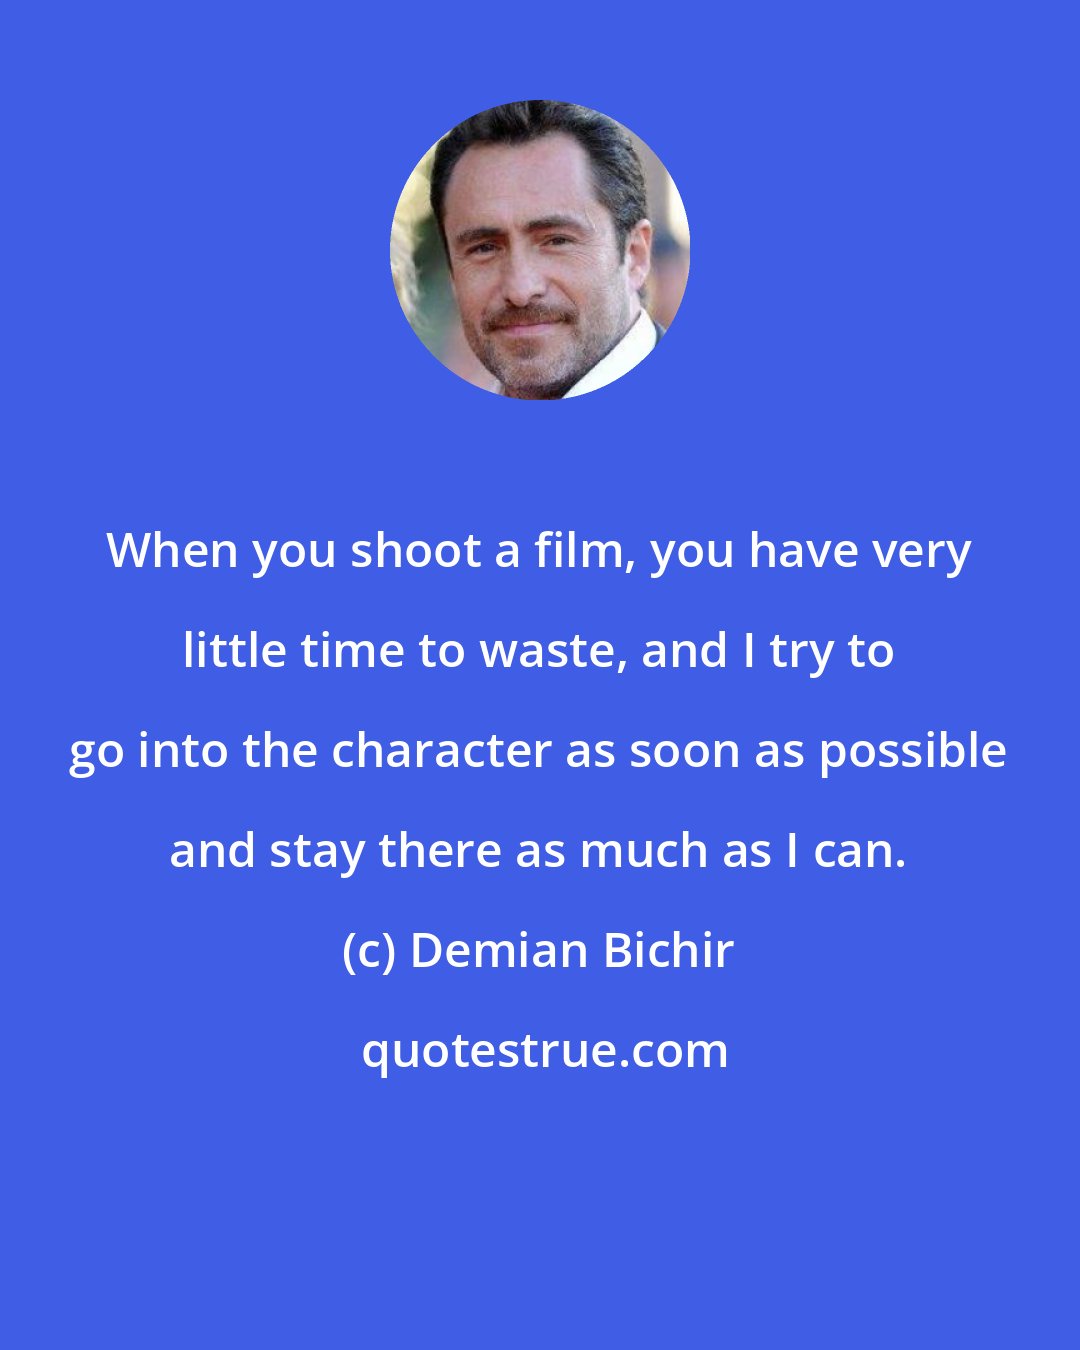 Demian Bichir: When you shoot a film, you have very little time to waste, and I try to go into the character as soon as possible and stay there as much as I can.